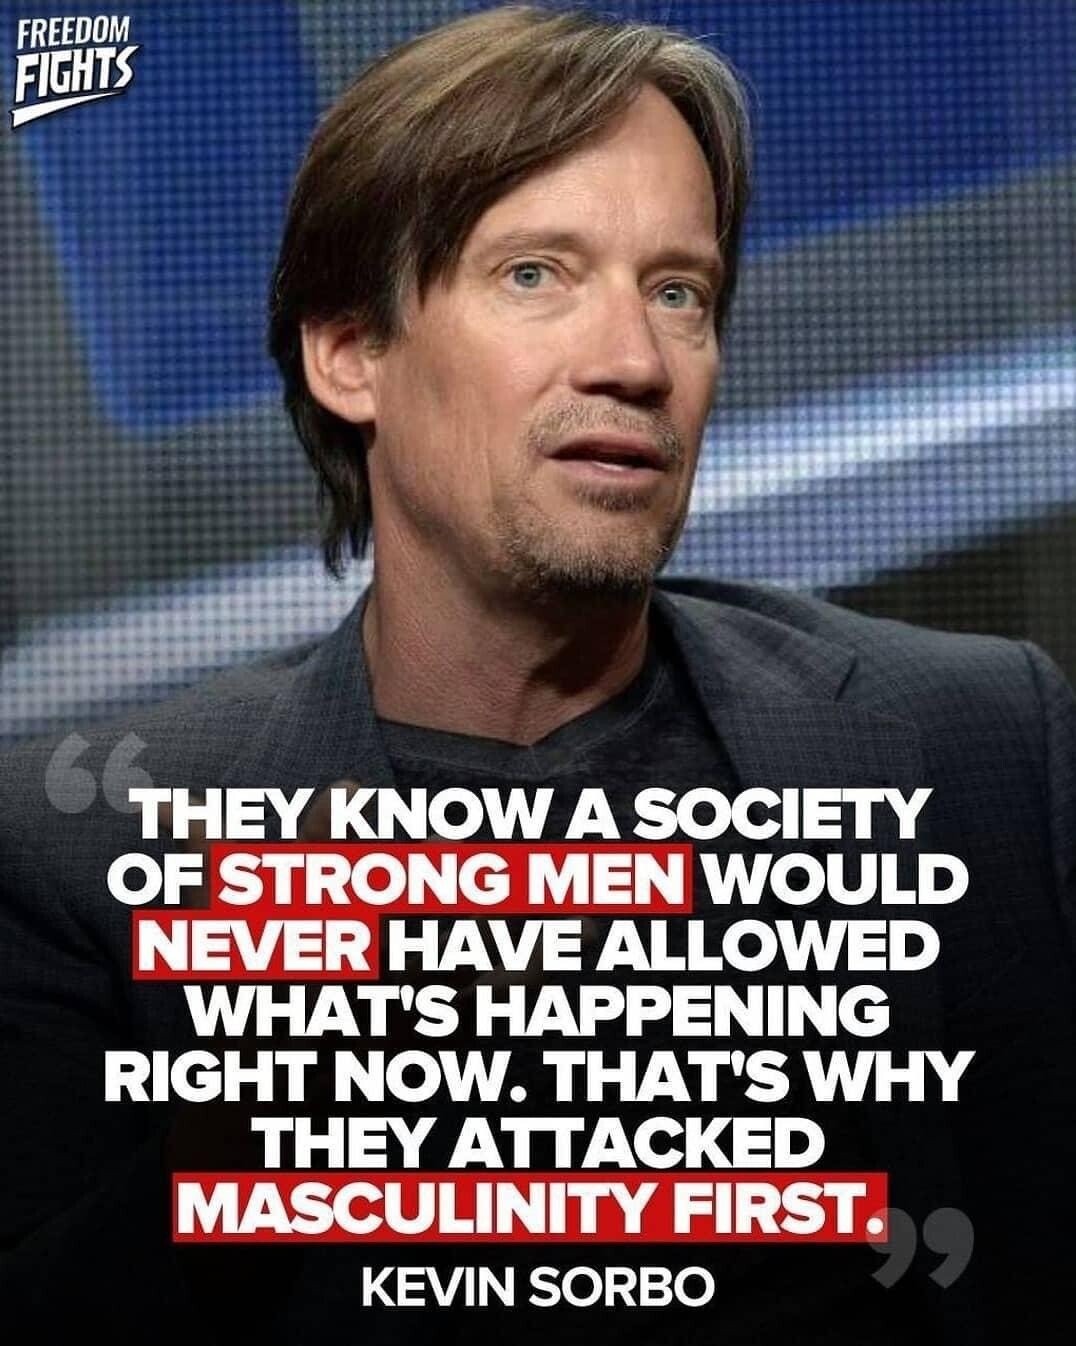 awesome randoms - kevin sorbo masculinity - Freedom Fights 66 They Know A Society Of Strong Men Would Never Have Allowed What'S Happening Right Now. That'S Why They Attacked Masculinity First. Kevin Sorbo